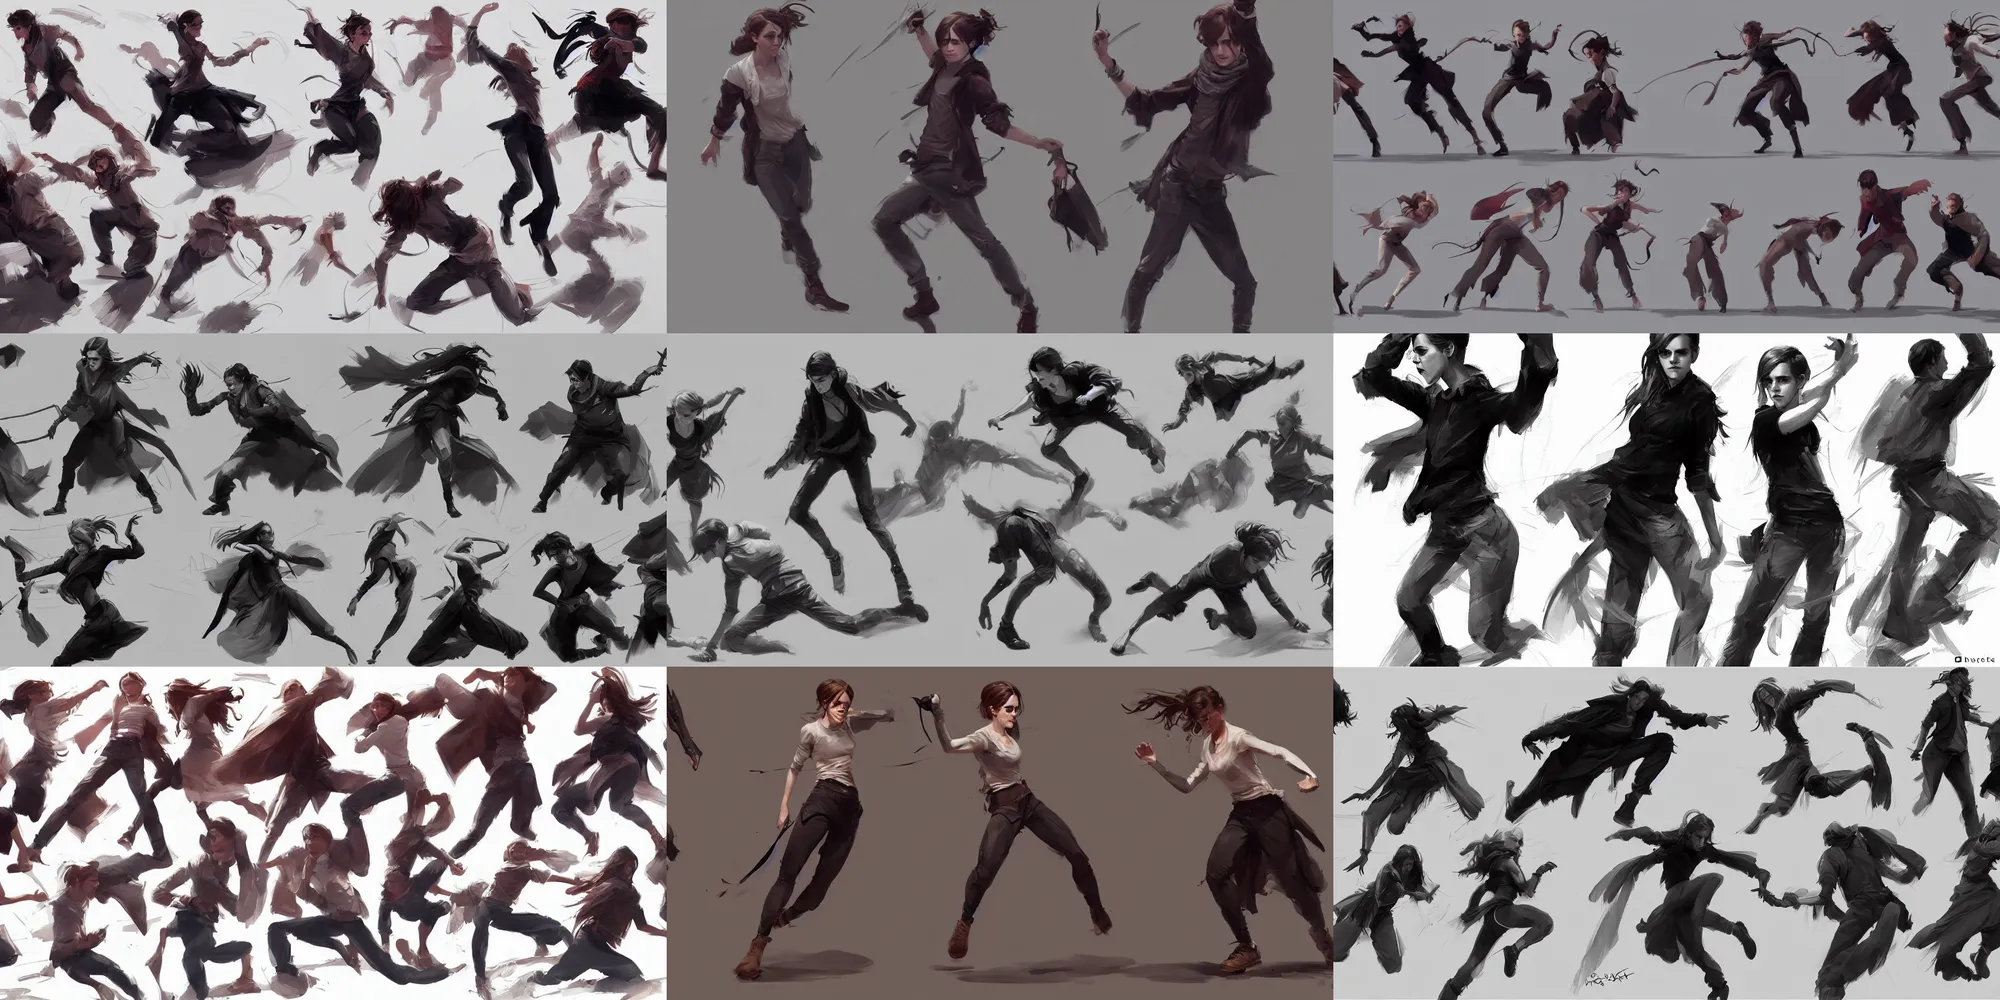 Pin by eh whatever on Add slow | Art reference, Sketch poses, Sketches